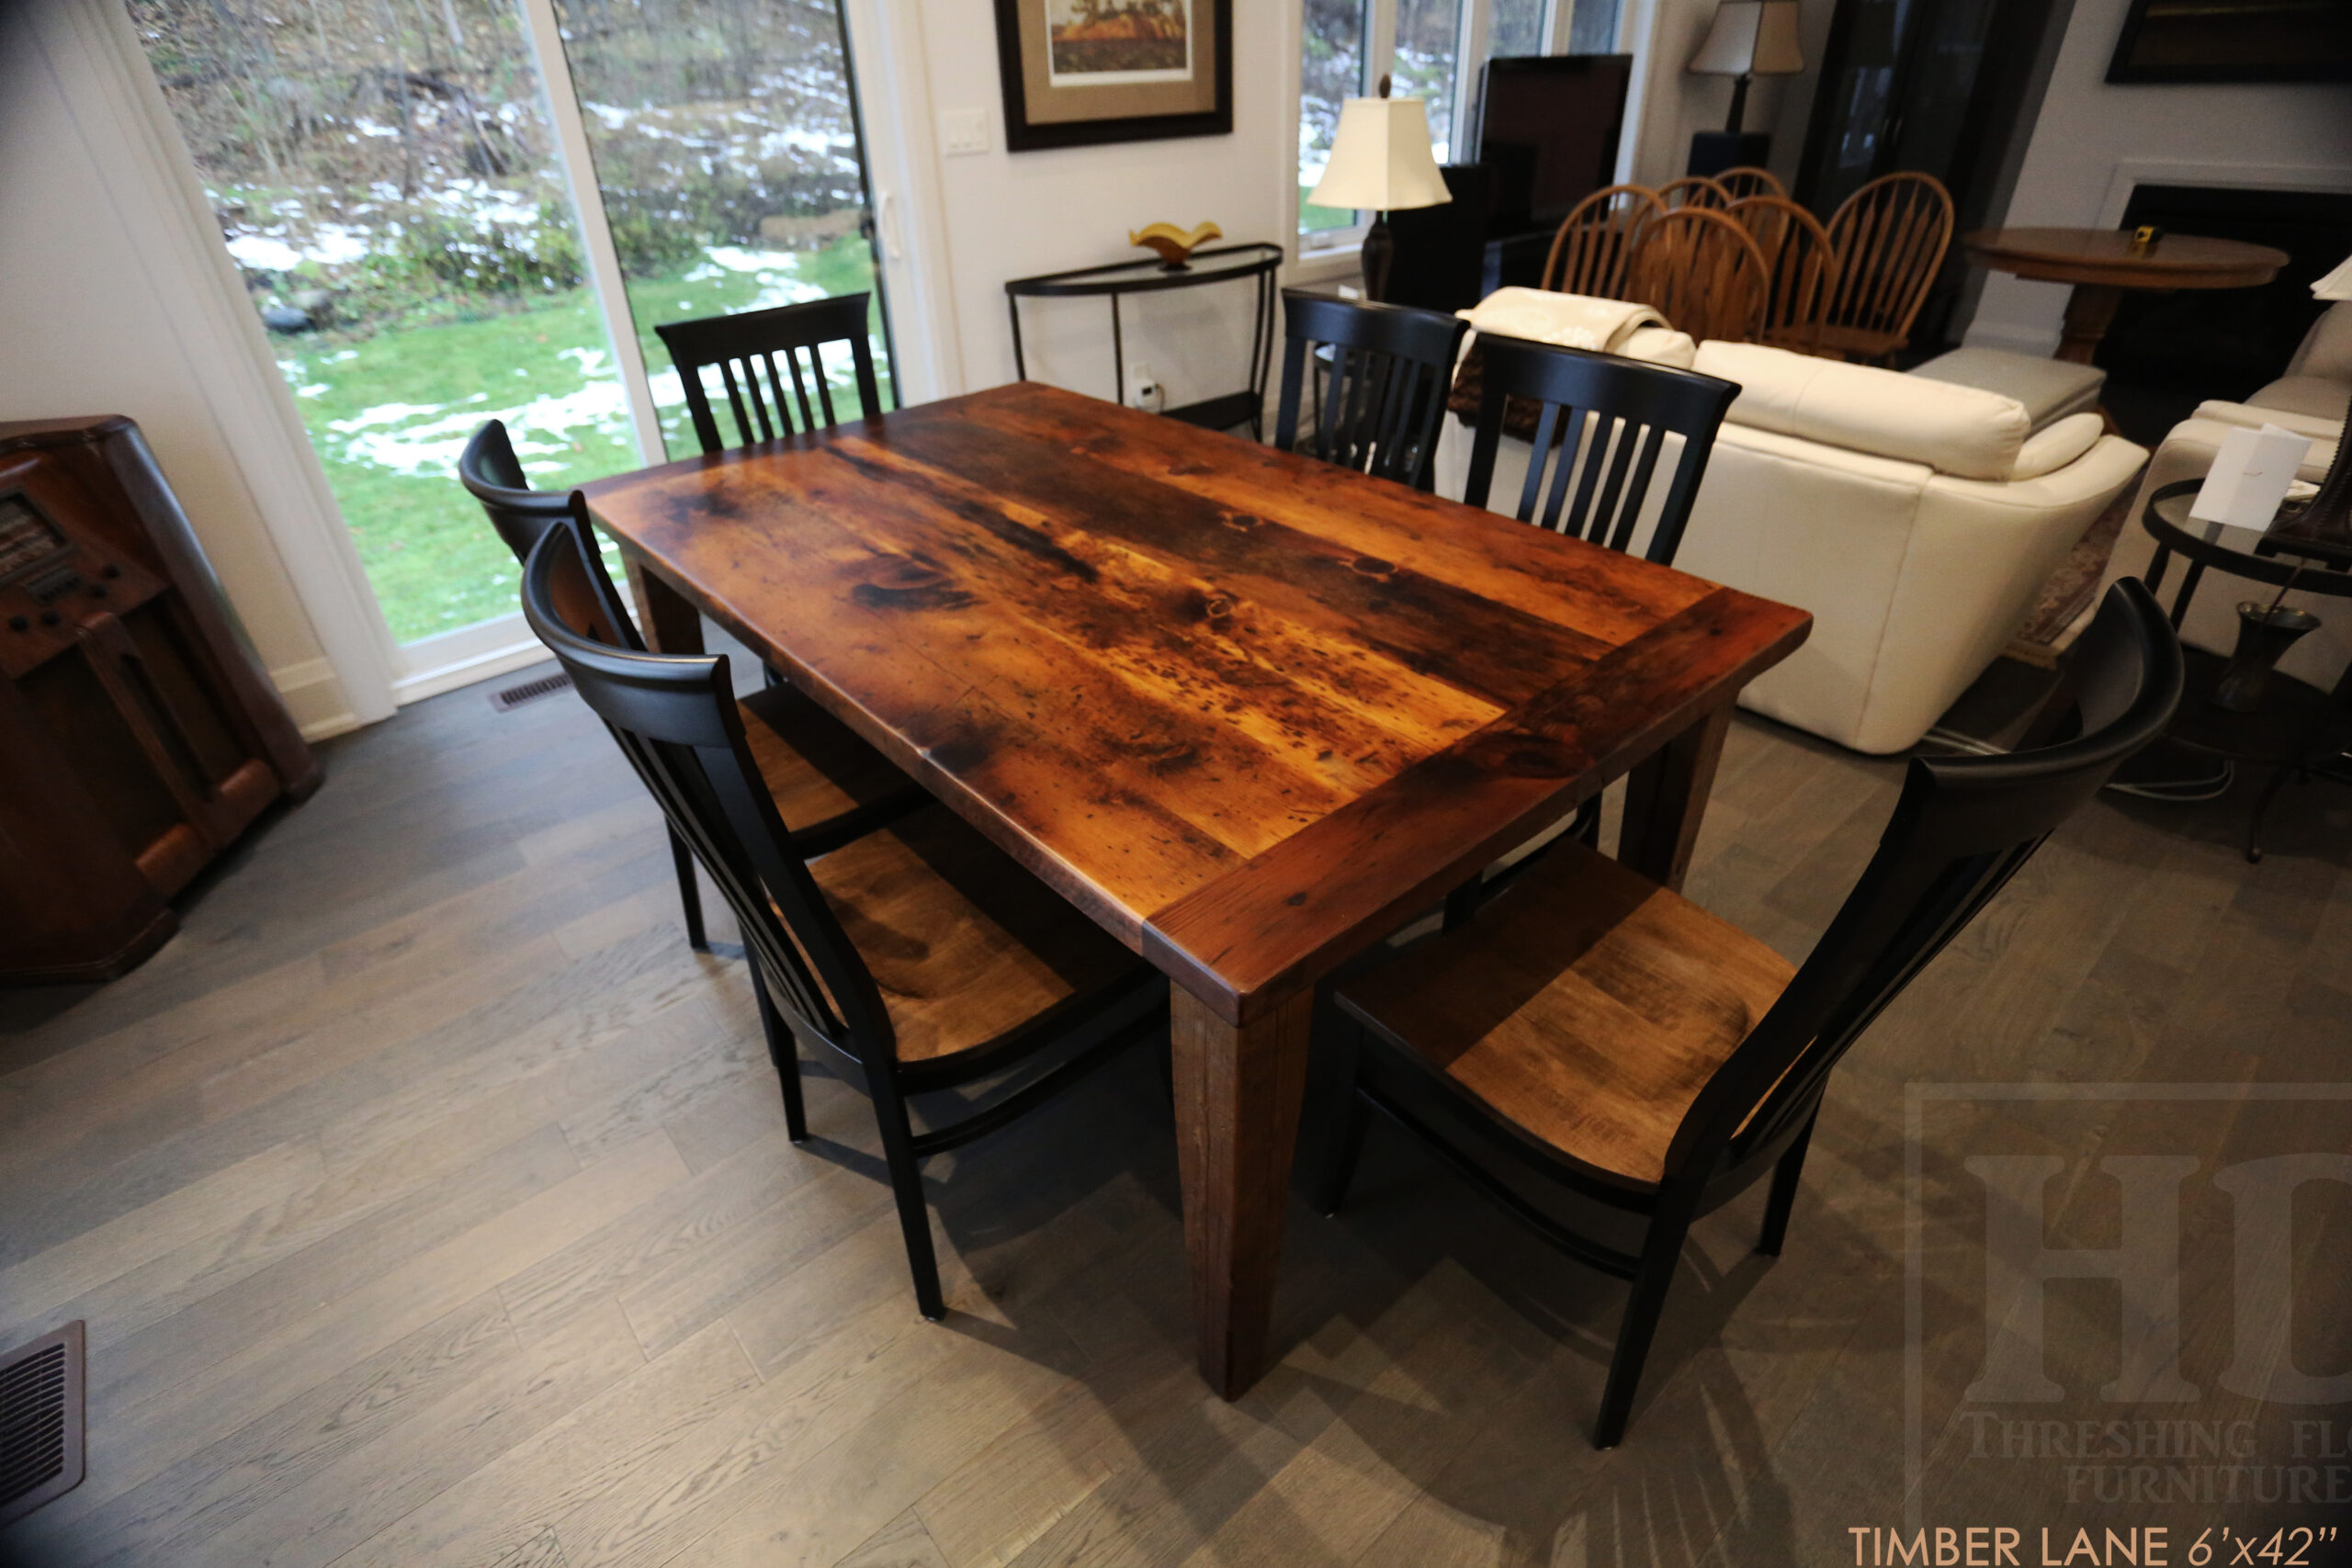 Project summary: 6’ Reclaimed Ontario Barnwood Table we made for an Thornbury, Ontario home – 42” wide – Harvest Base / Tapered Windbrace Beam Legs - [2] Drawers 24” wide on long sides - Old Growth Hemlock Threshing Floor Construction - Original edges & distressing maintained – Bread Edge Ends - Premium epoxy + matte polyurethane finish – [6] Athena Chairs / Wormy Maple / Black Painted Frame; Seat Stained Colour of Table / Polyurethane clearcoat finish - www.table.ca